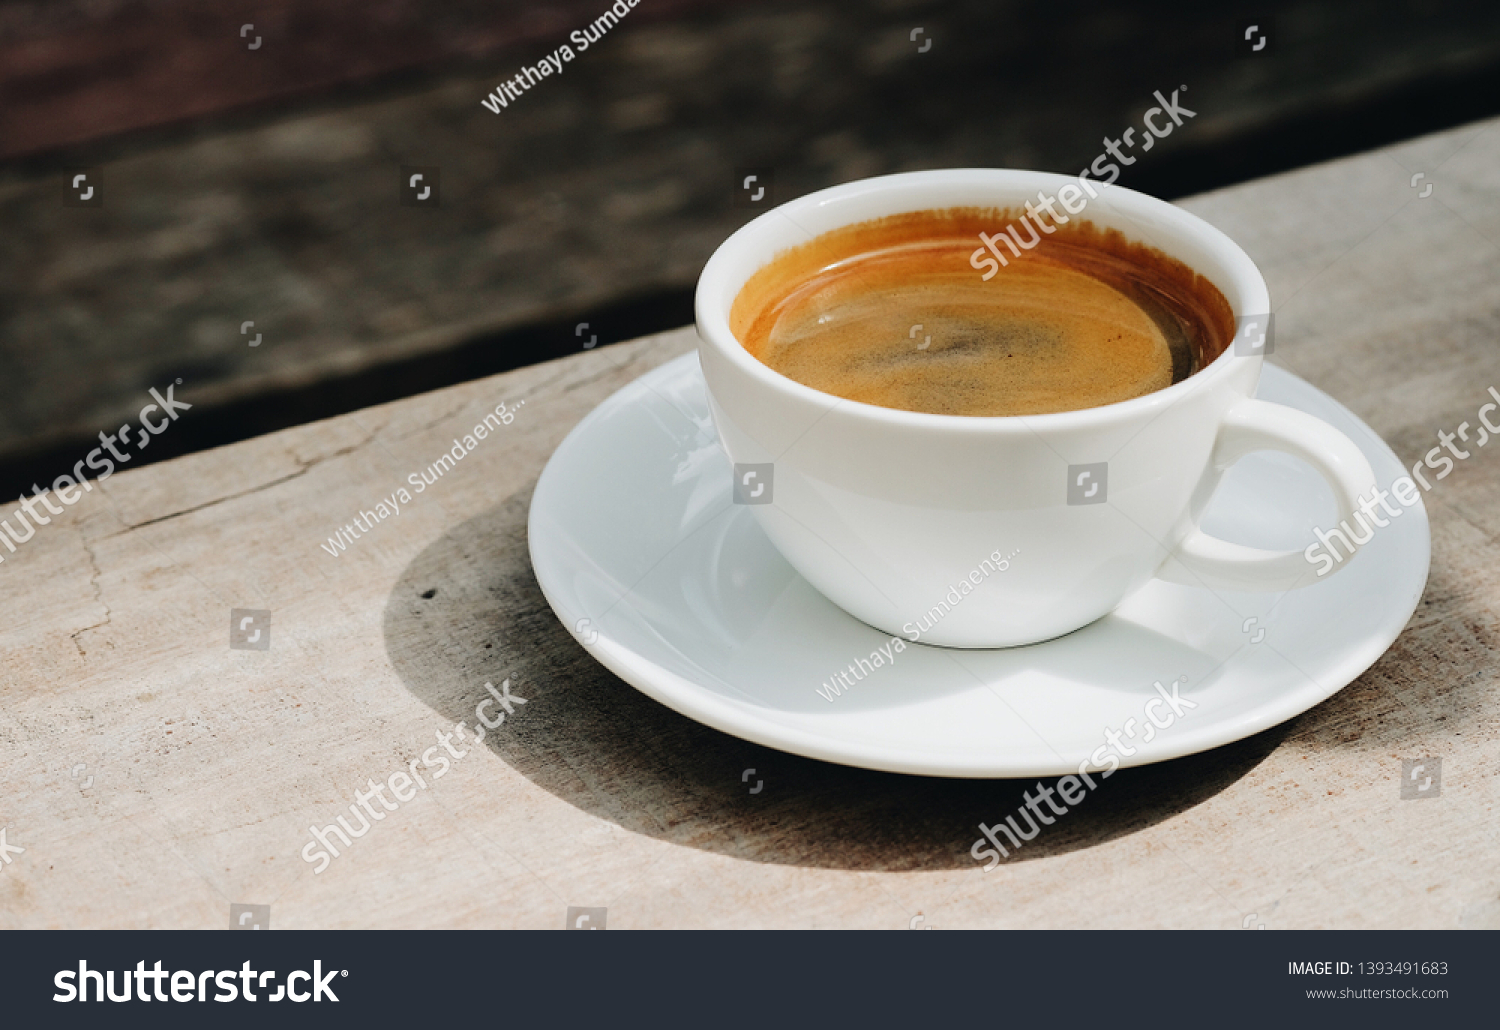 Cup of americano coffee on wooden table #1393491683